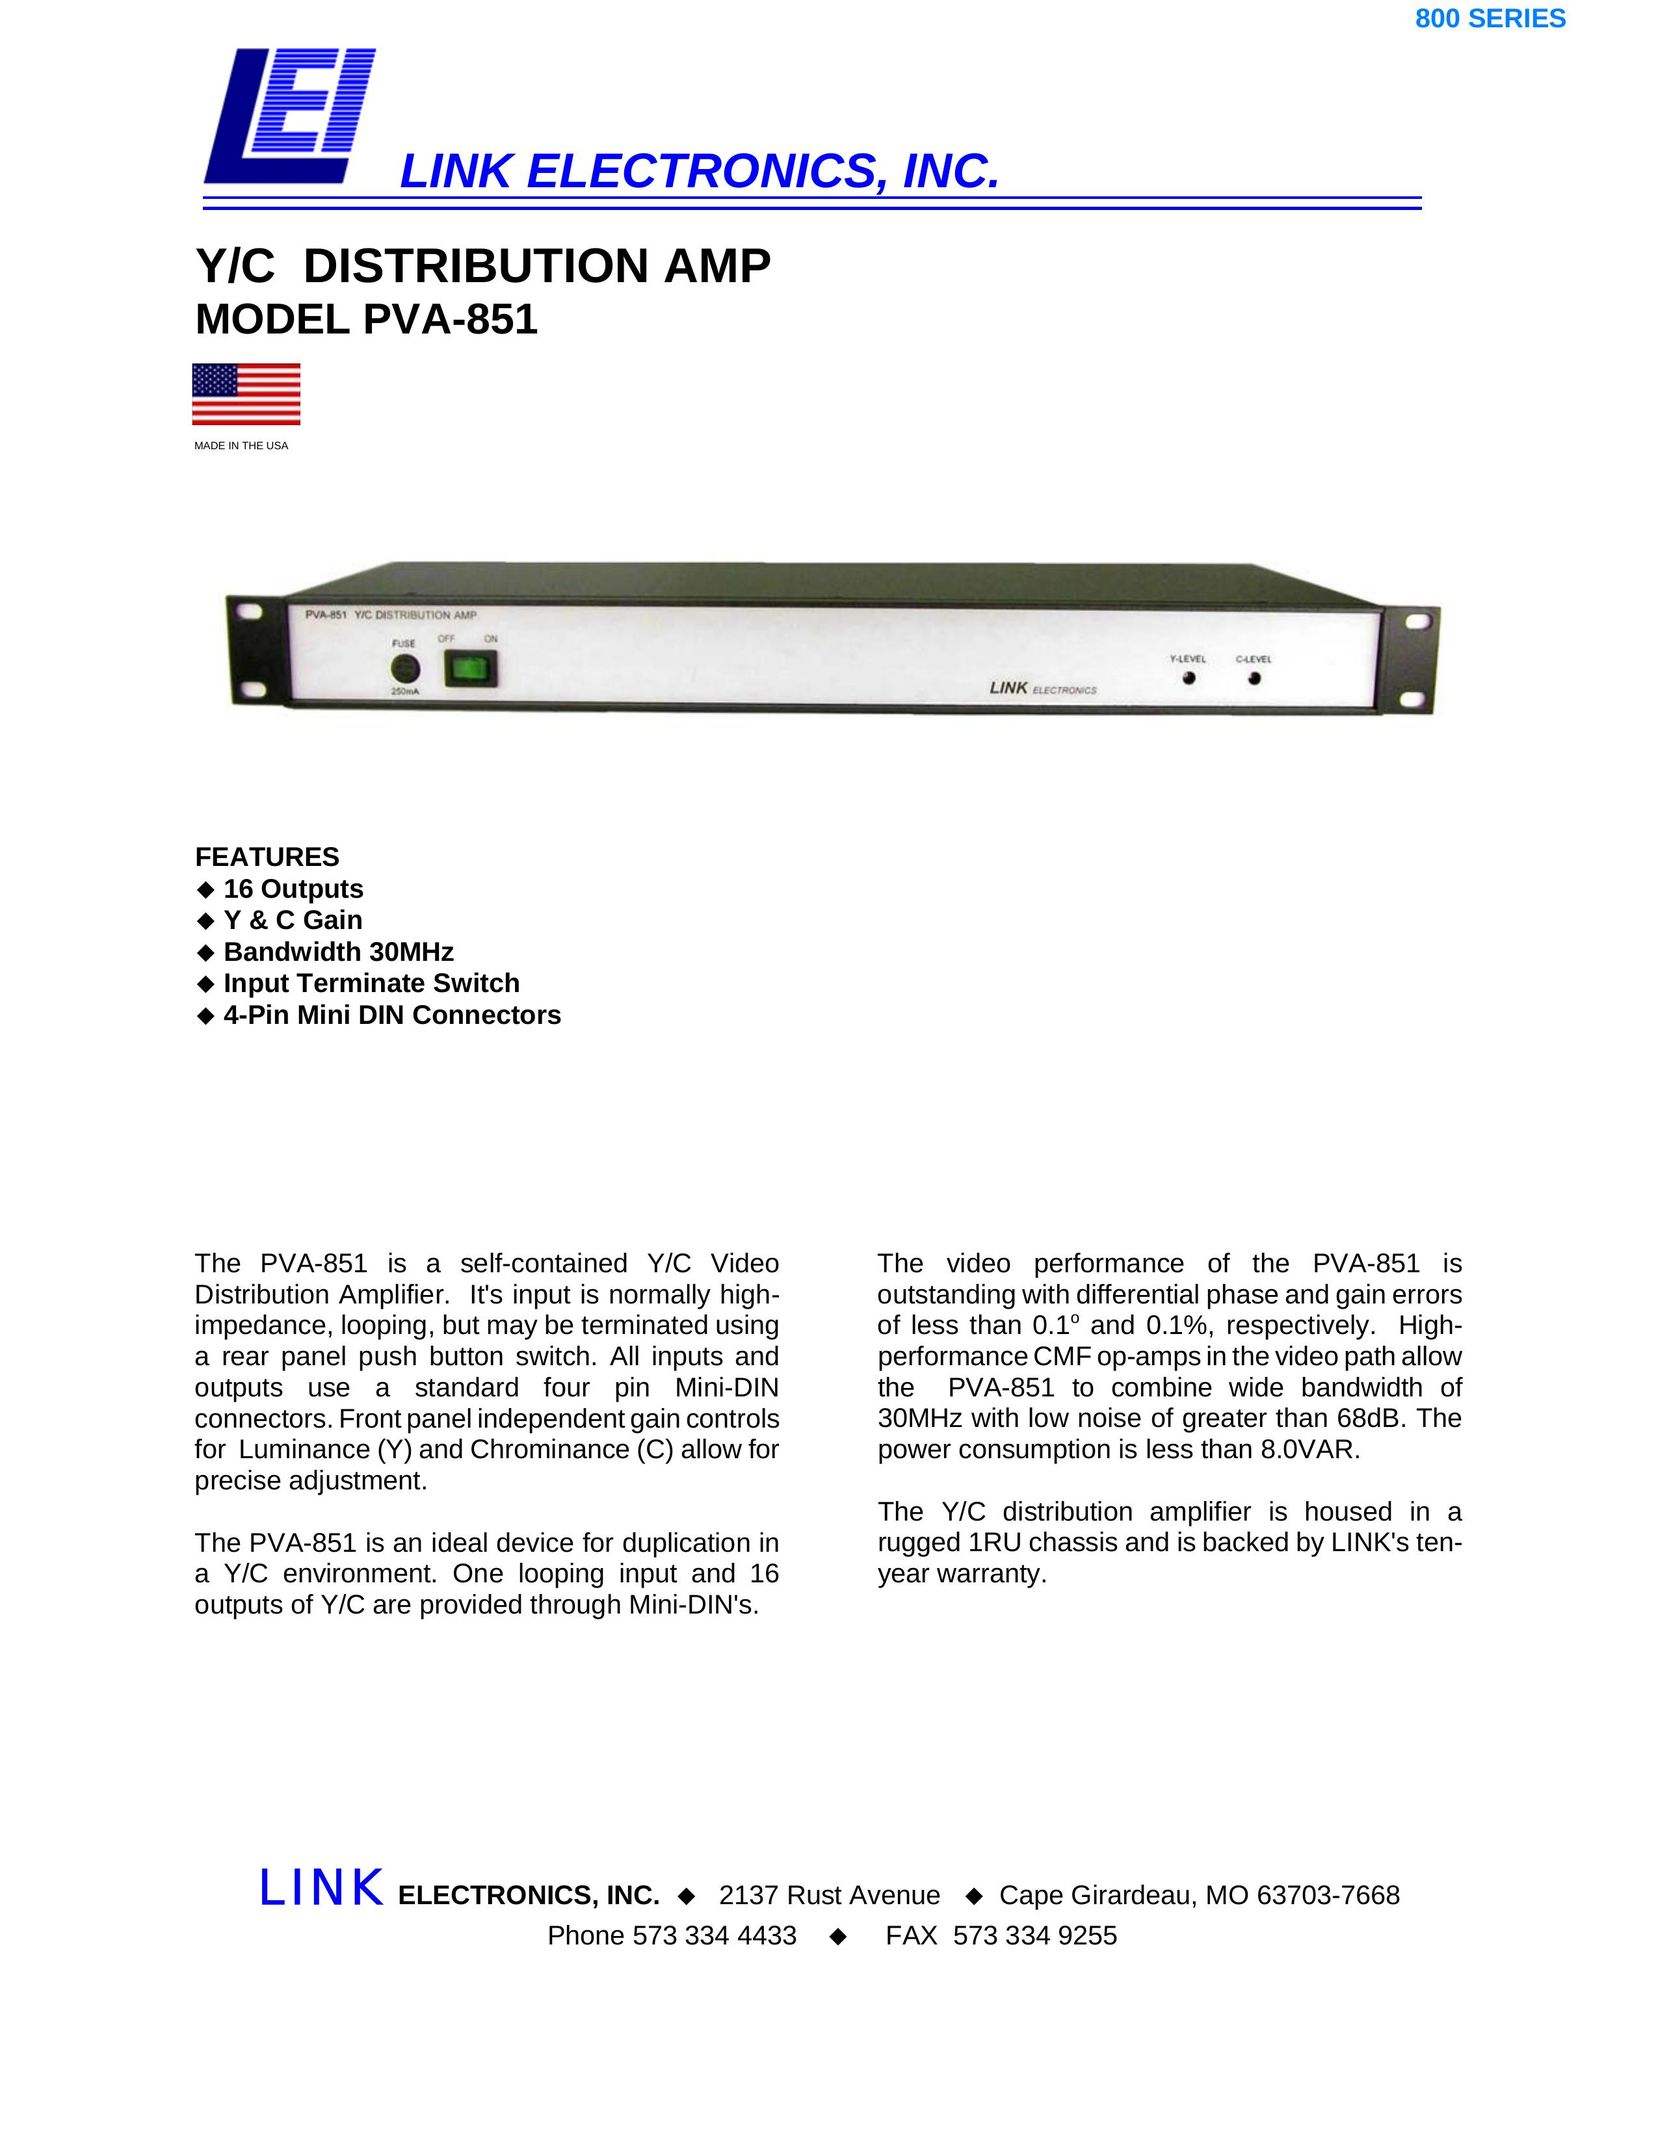 Link electronic PVA-851 Stereo Amplifier User Manual